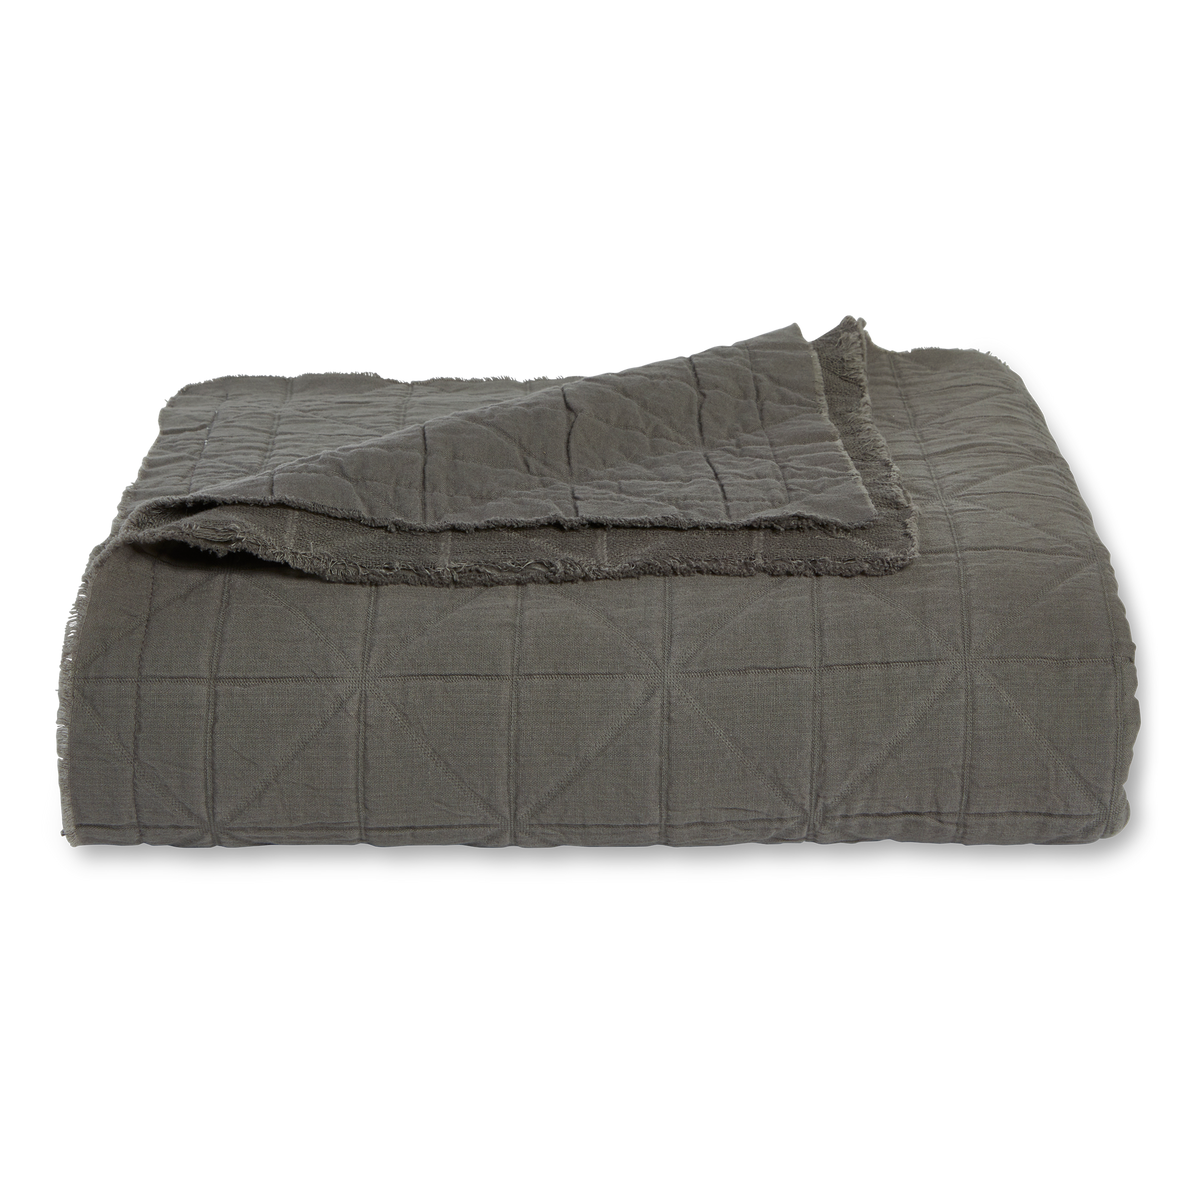 Relaxed and casual, this quilted coverlet is made with cotton and has the perfect summer weight.